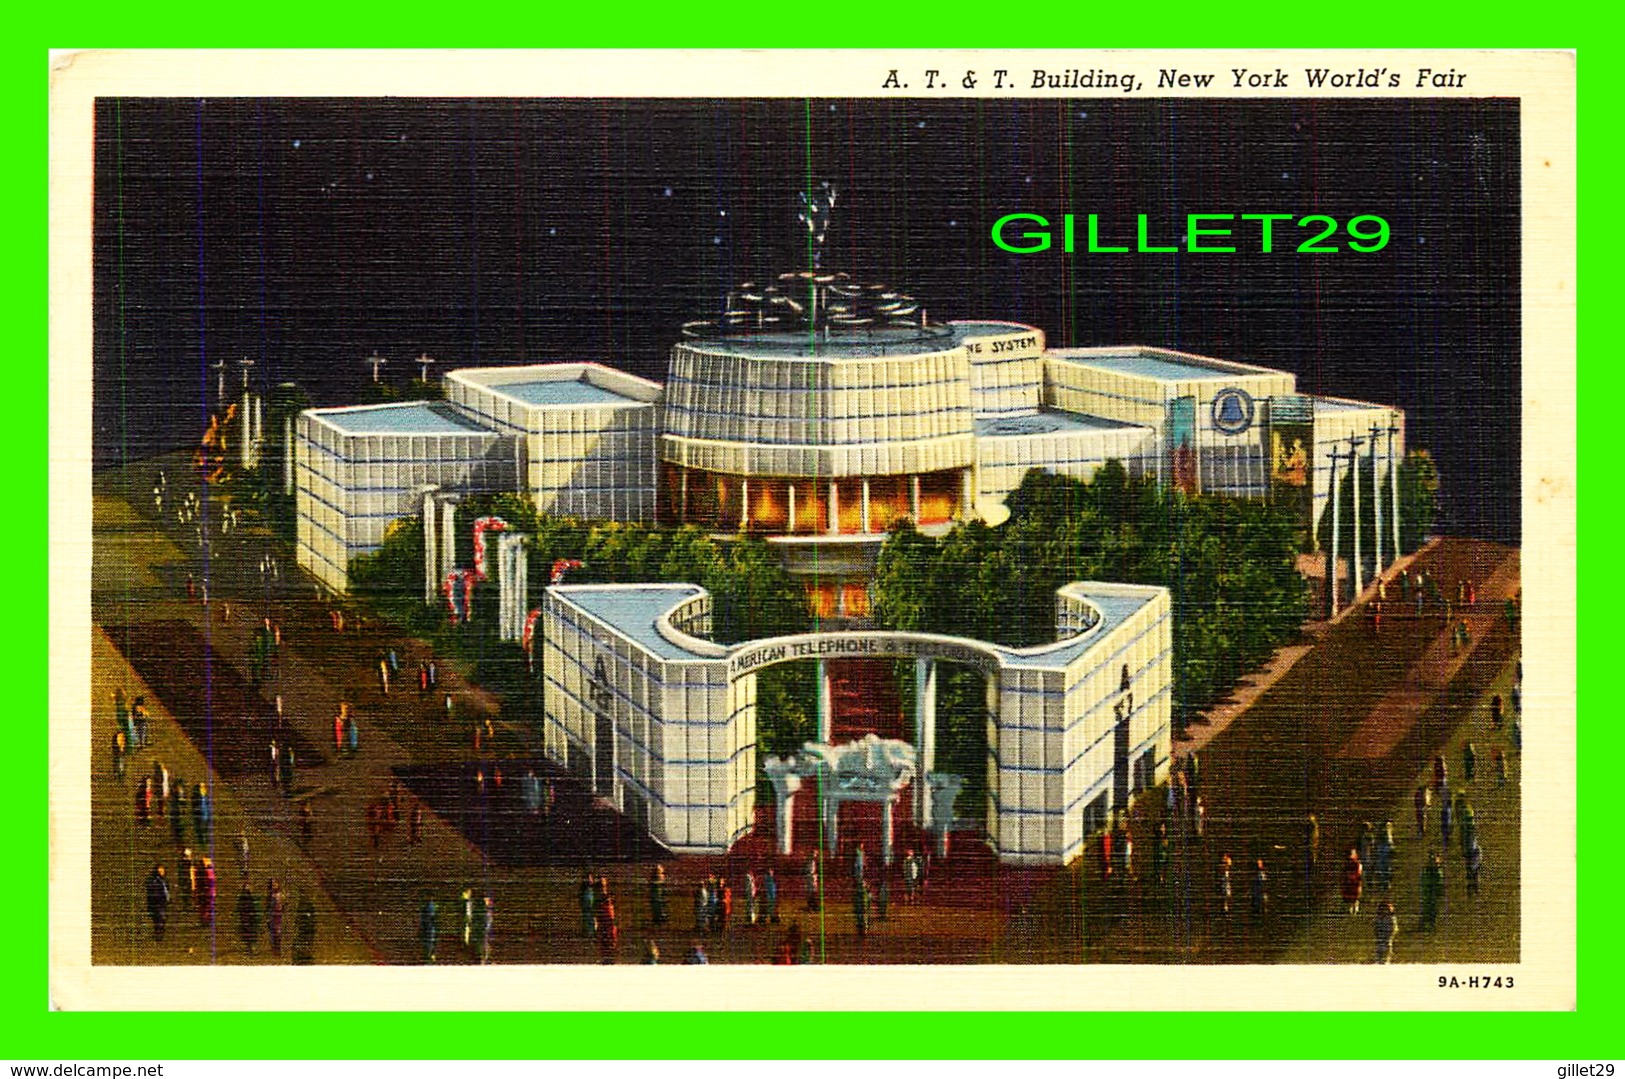 NEW YORK CITY, NY - A. T. & T. BUILDING, NEW YORK WORLD'S FAIR, 1939 - INTERBOROUGH NEWS CO - - Expositions